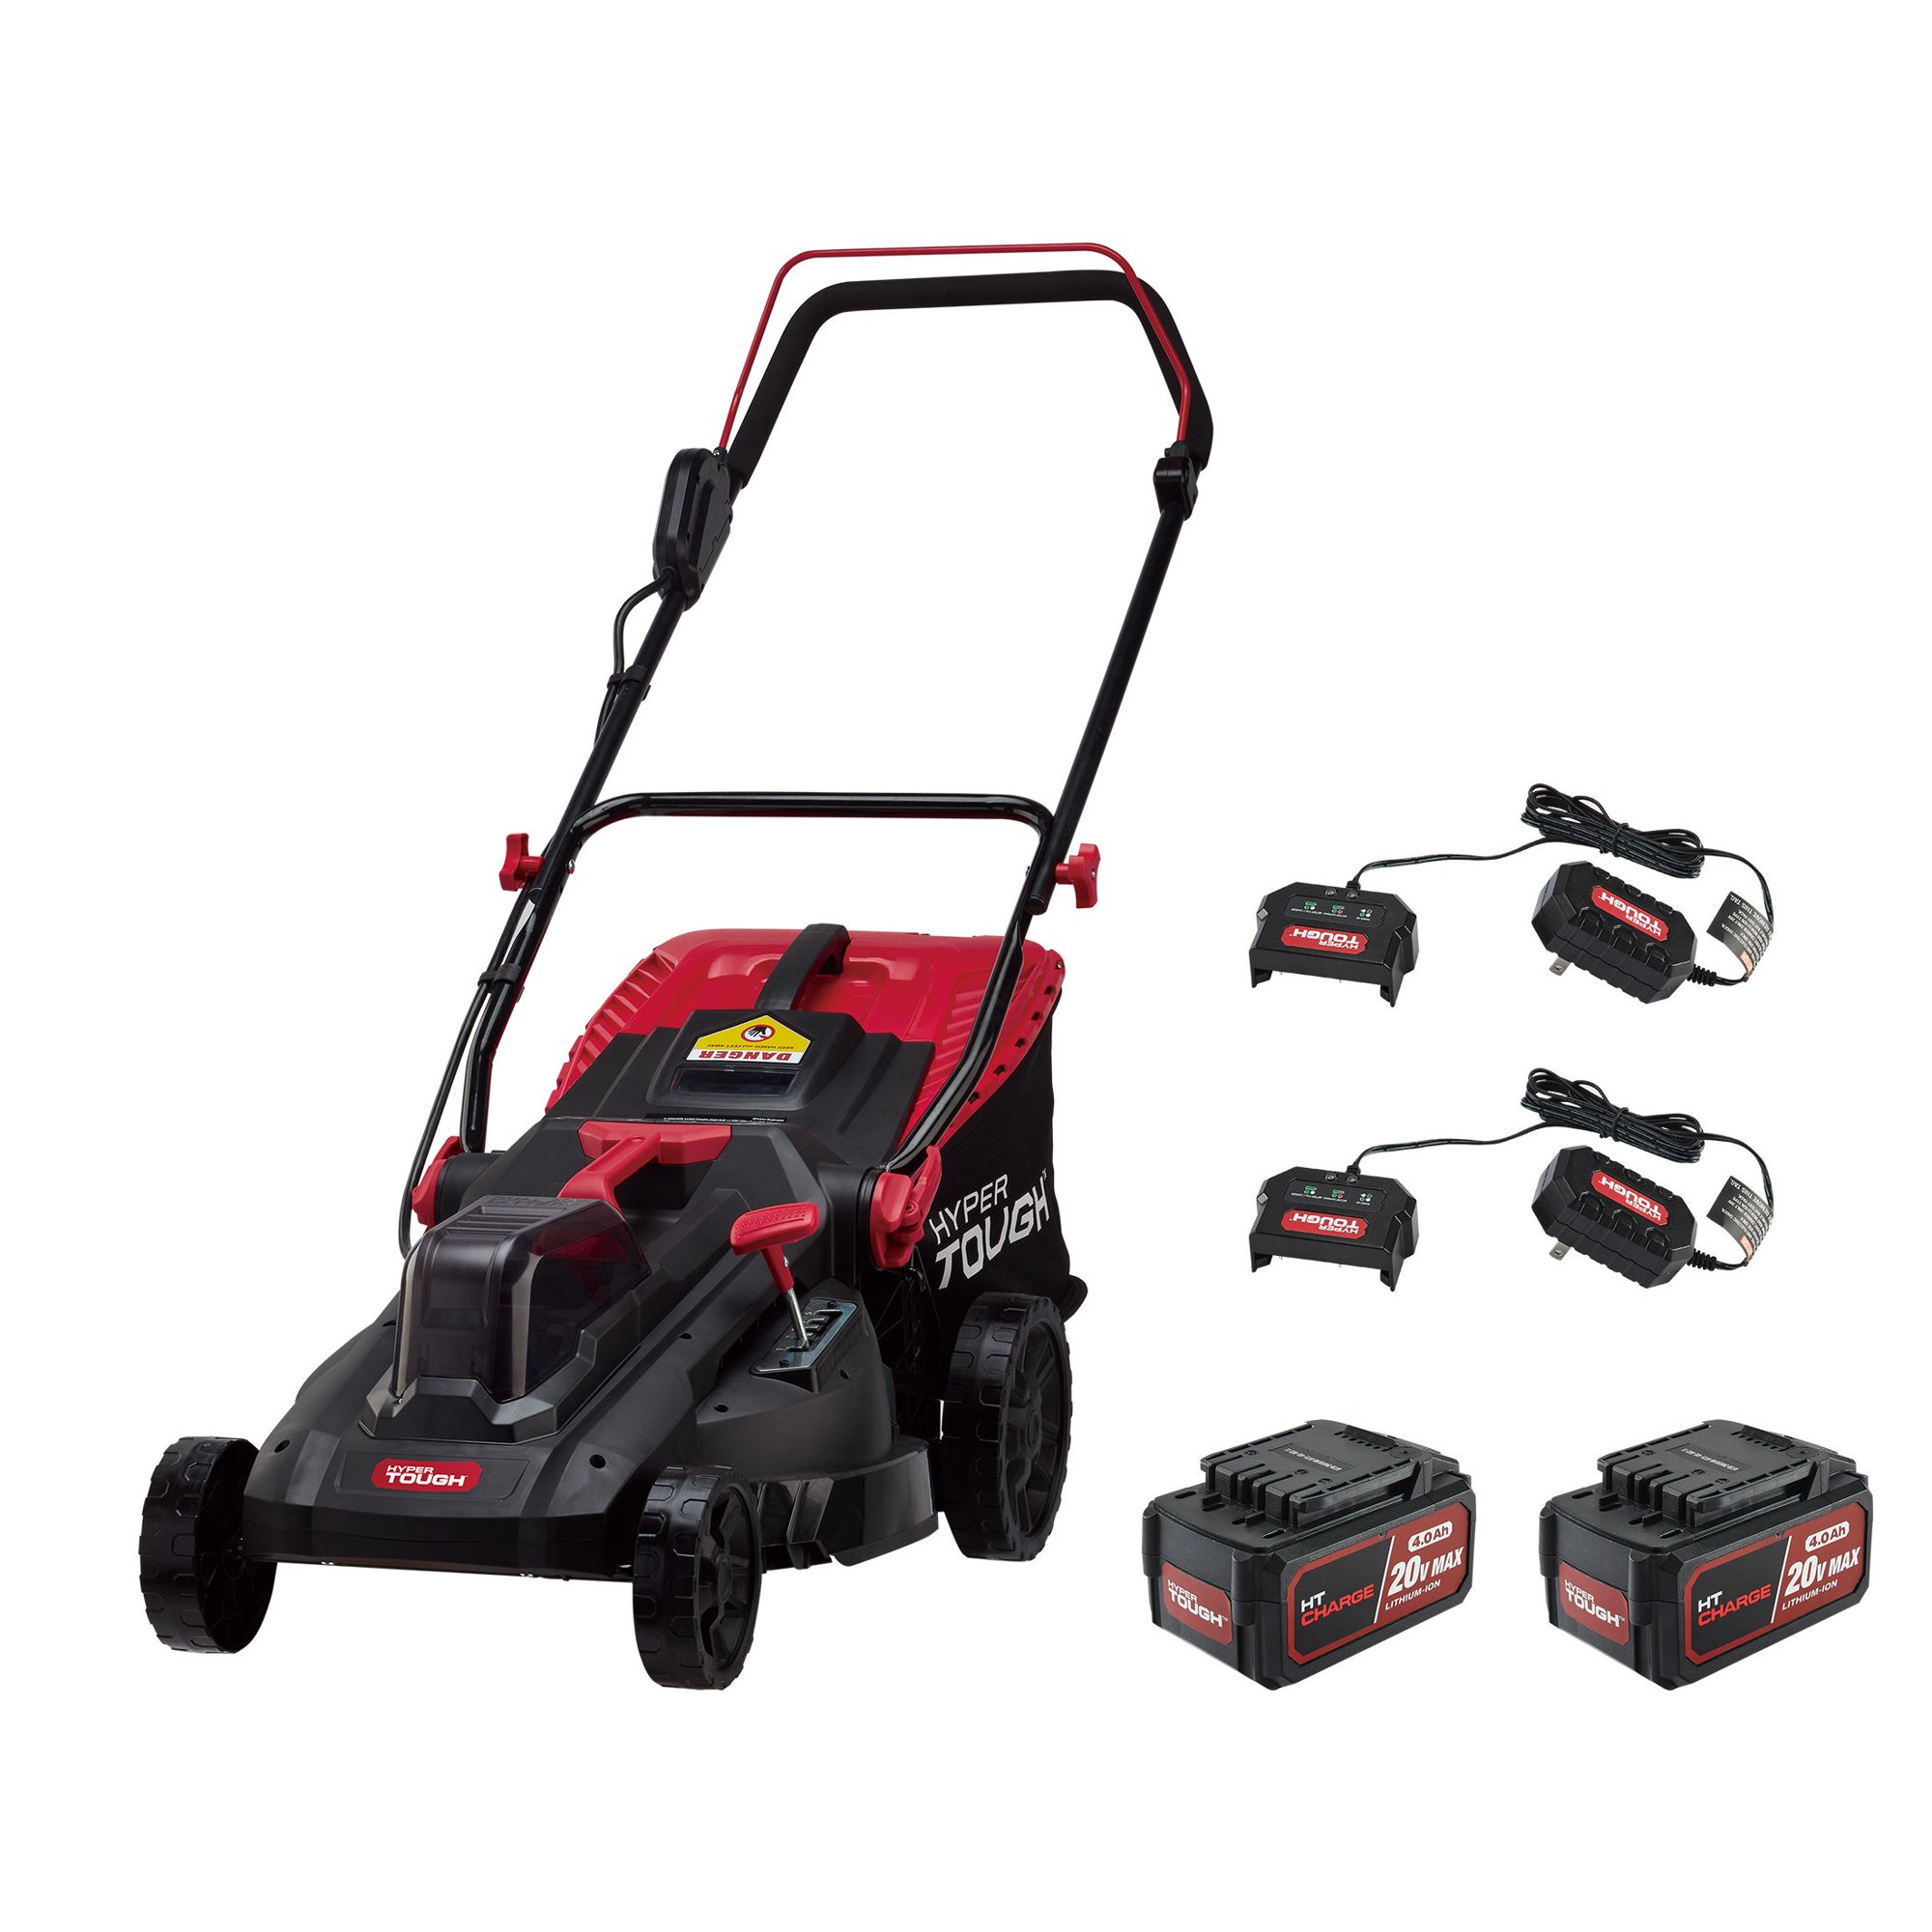 16" Hyper Tough 40V Cordless Lawn Mower w/ 2-Pack 4.0Ah Battery & 2-Pack Charger $99 + Free Shipping